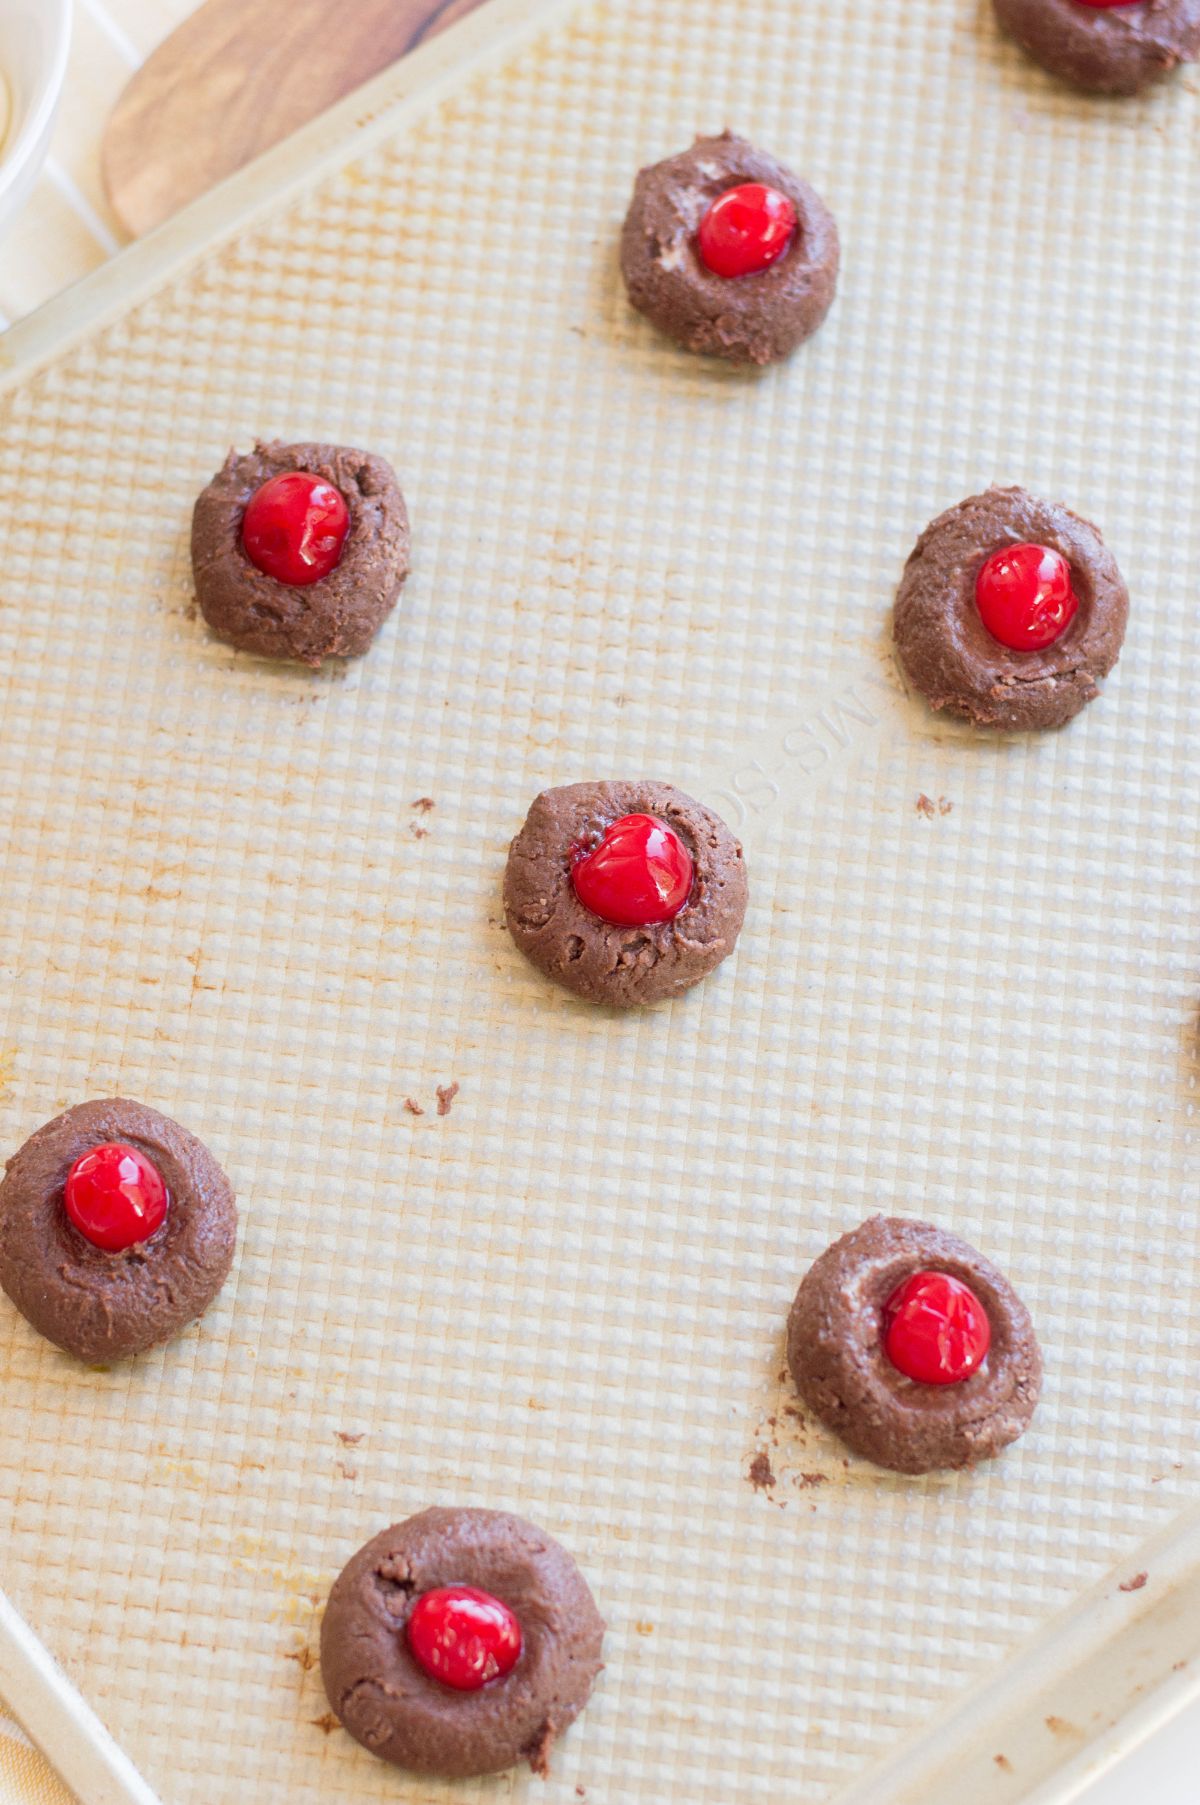 Shaped doung into 1-inch balls with cherry on top of each of them, placed on a baking sheet.